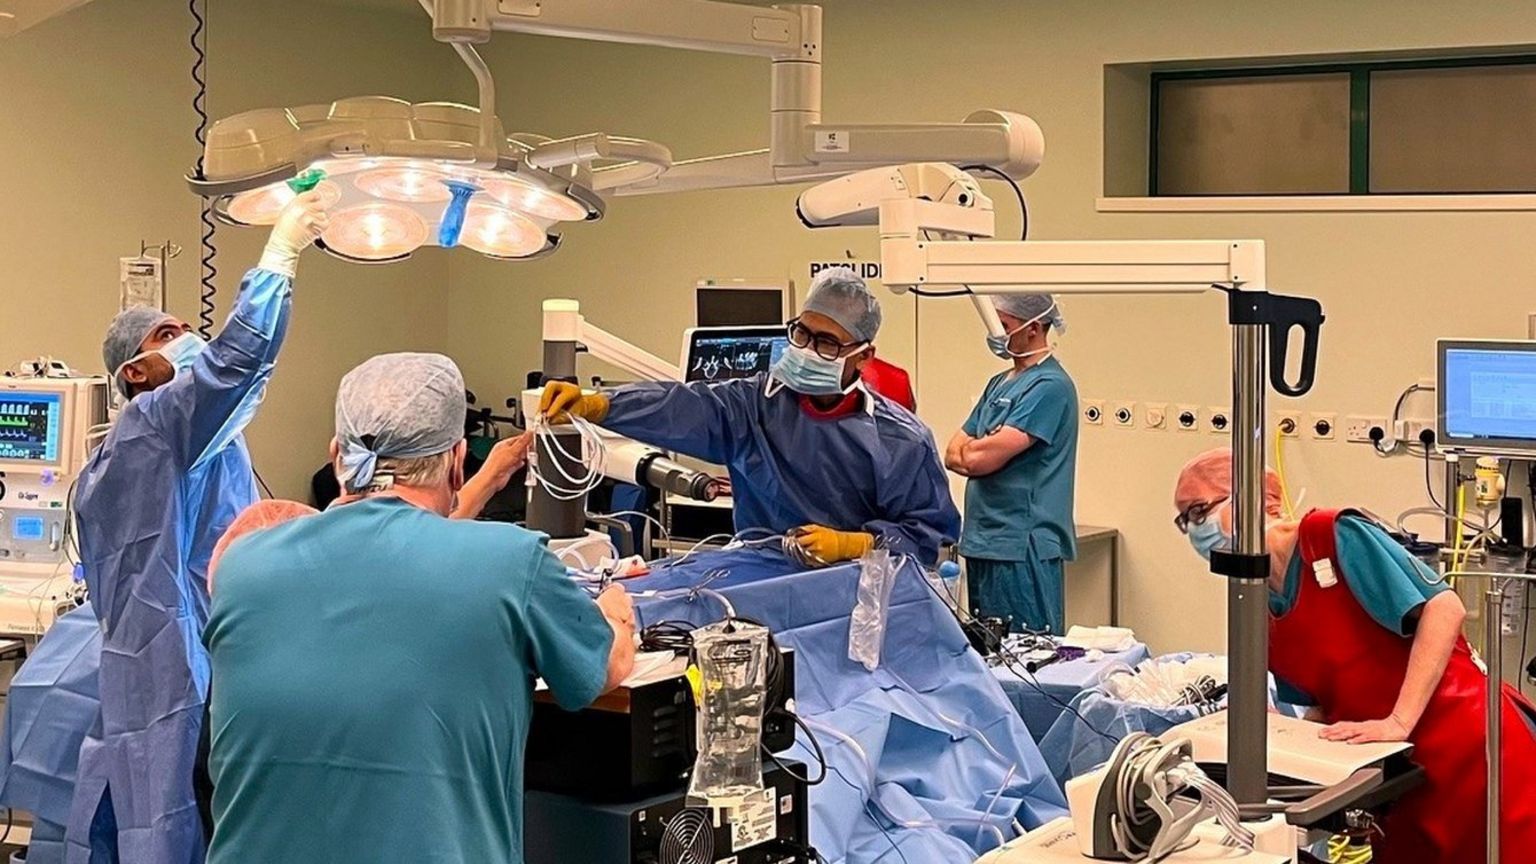 A surgical team has now carried out the 100th spinal operation using this robotic equipment at The Walton Centre